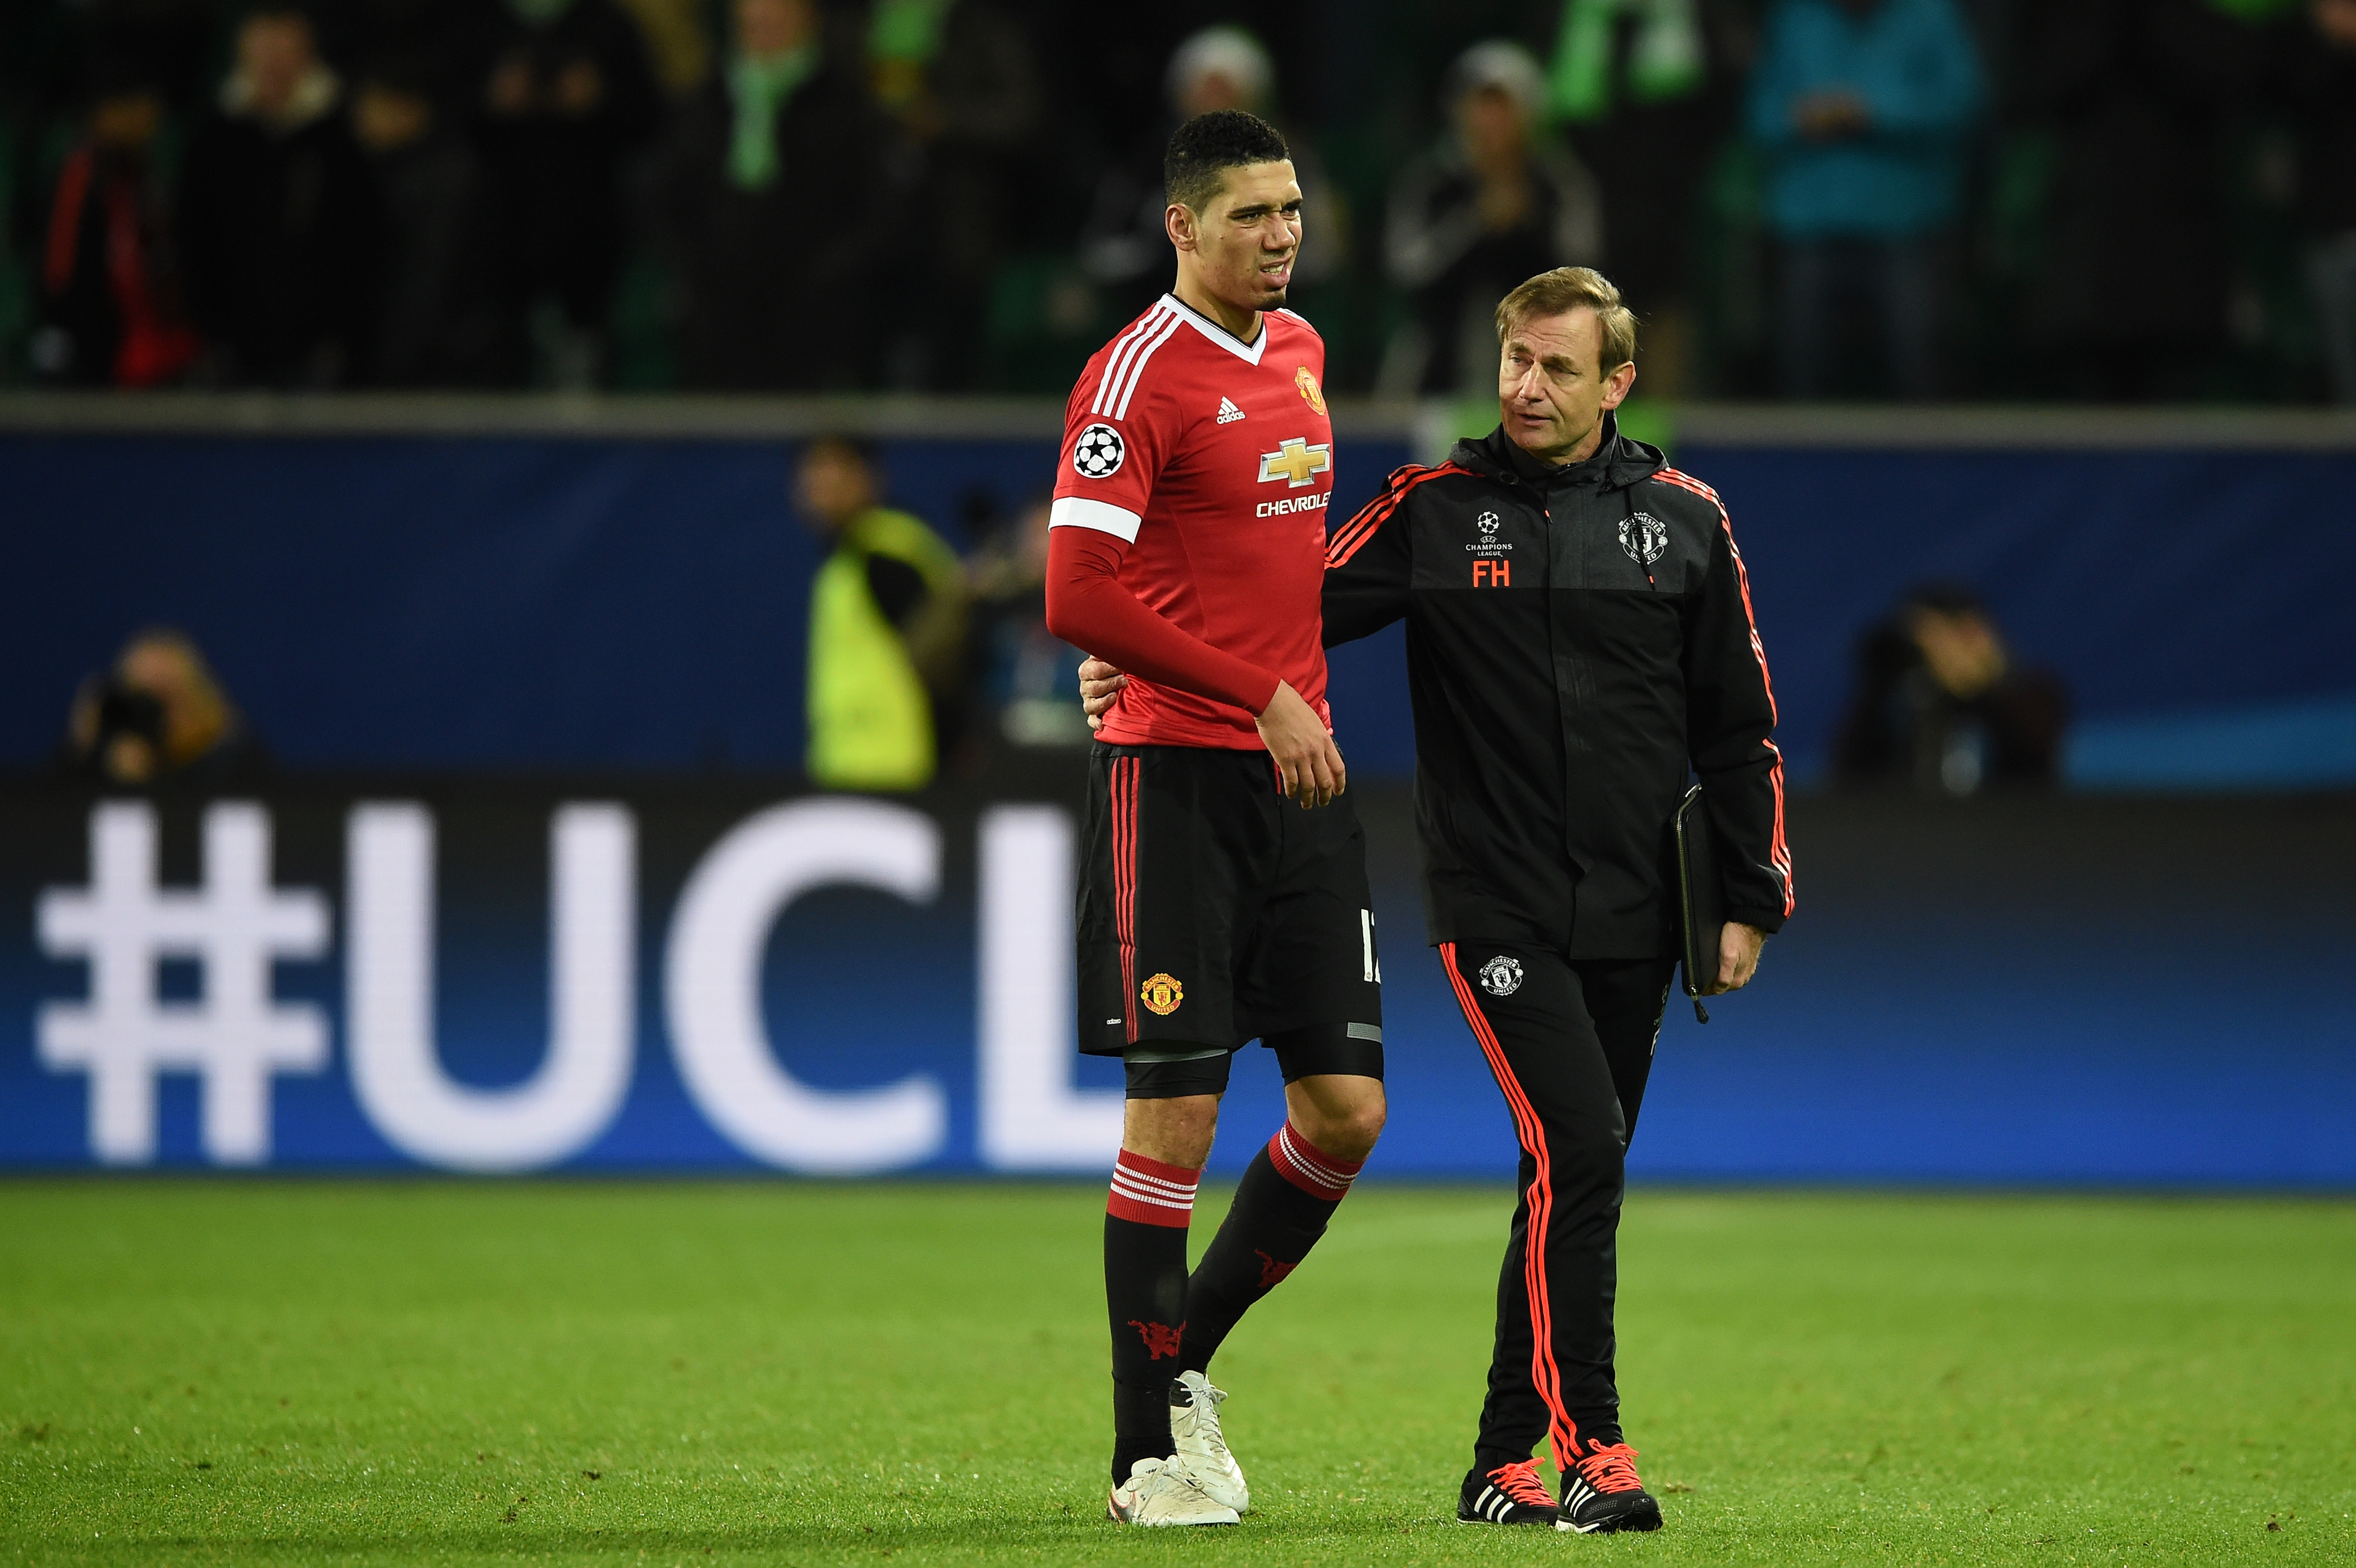 WOLFSBURG, GERMANY - DECEMBER 08:  A dejected Chris Smalling the captain of Manchester United walks off the pitch following hjis team's 3-2 defeat and exit from the competition during the UEFA Champions League group B match between VfL Wolfsburg and Manchester United at the Volkswagen Arena on December 8, 2015 in Wolfsburg, Germany.  (Photo by Stuart Franklin/Bongarts/Getty Images)